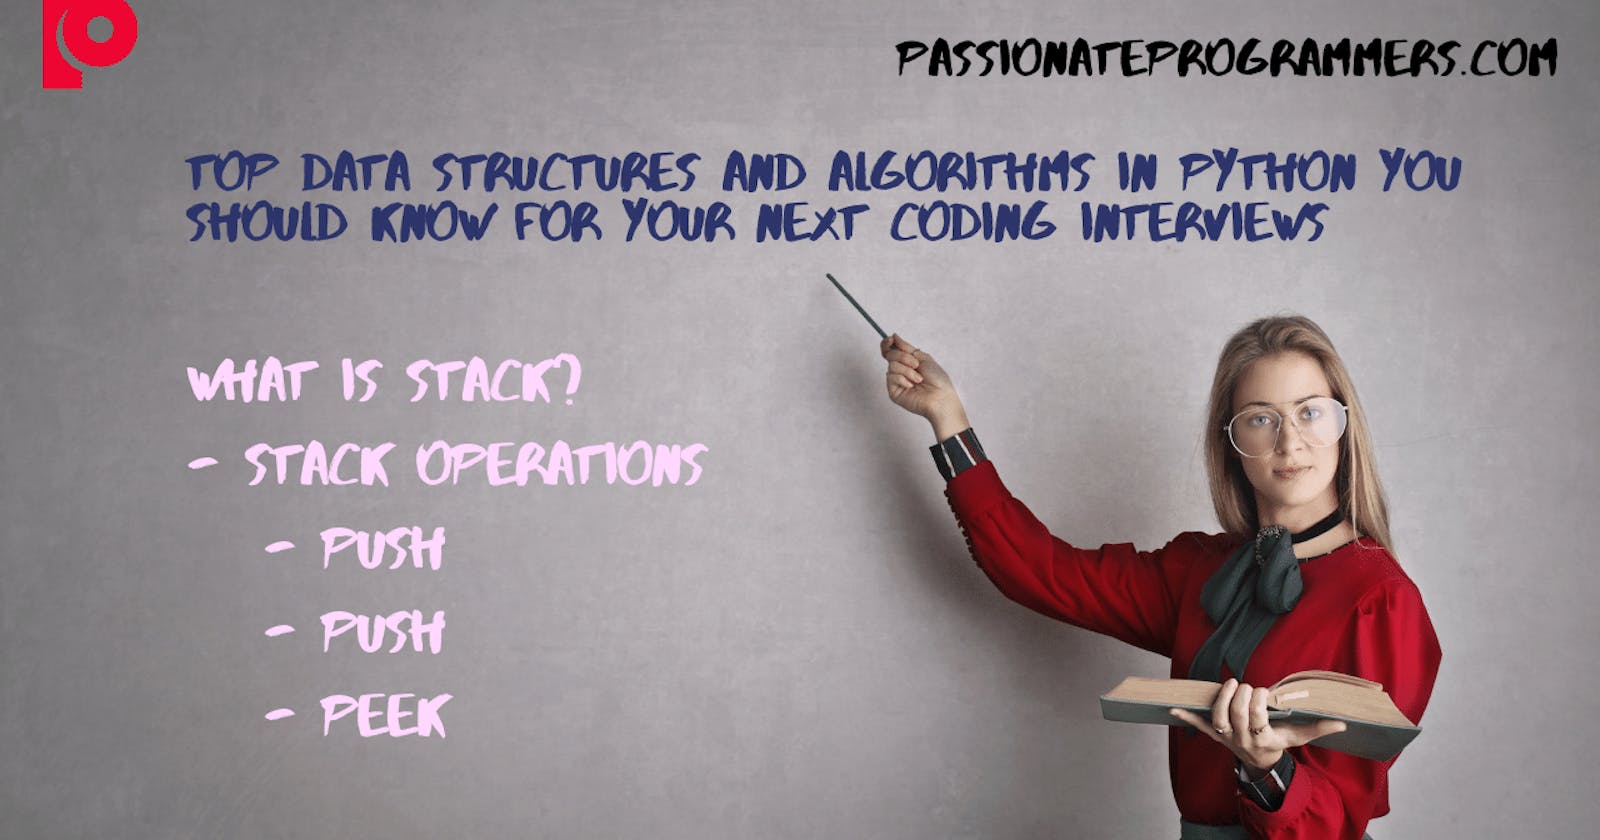 Top Data Structures and Algorithms in Python